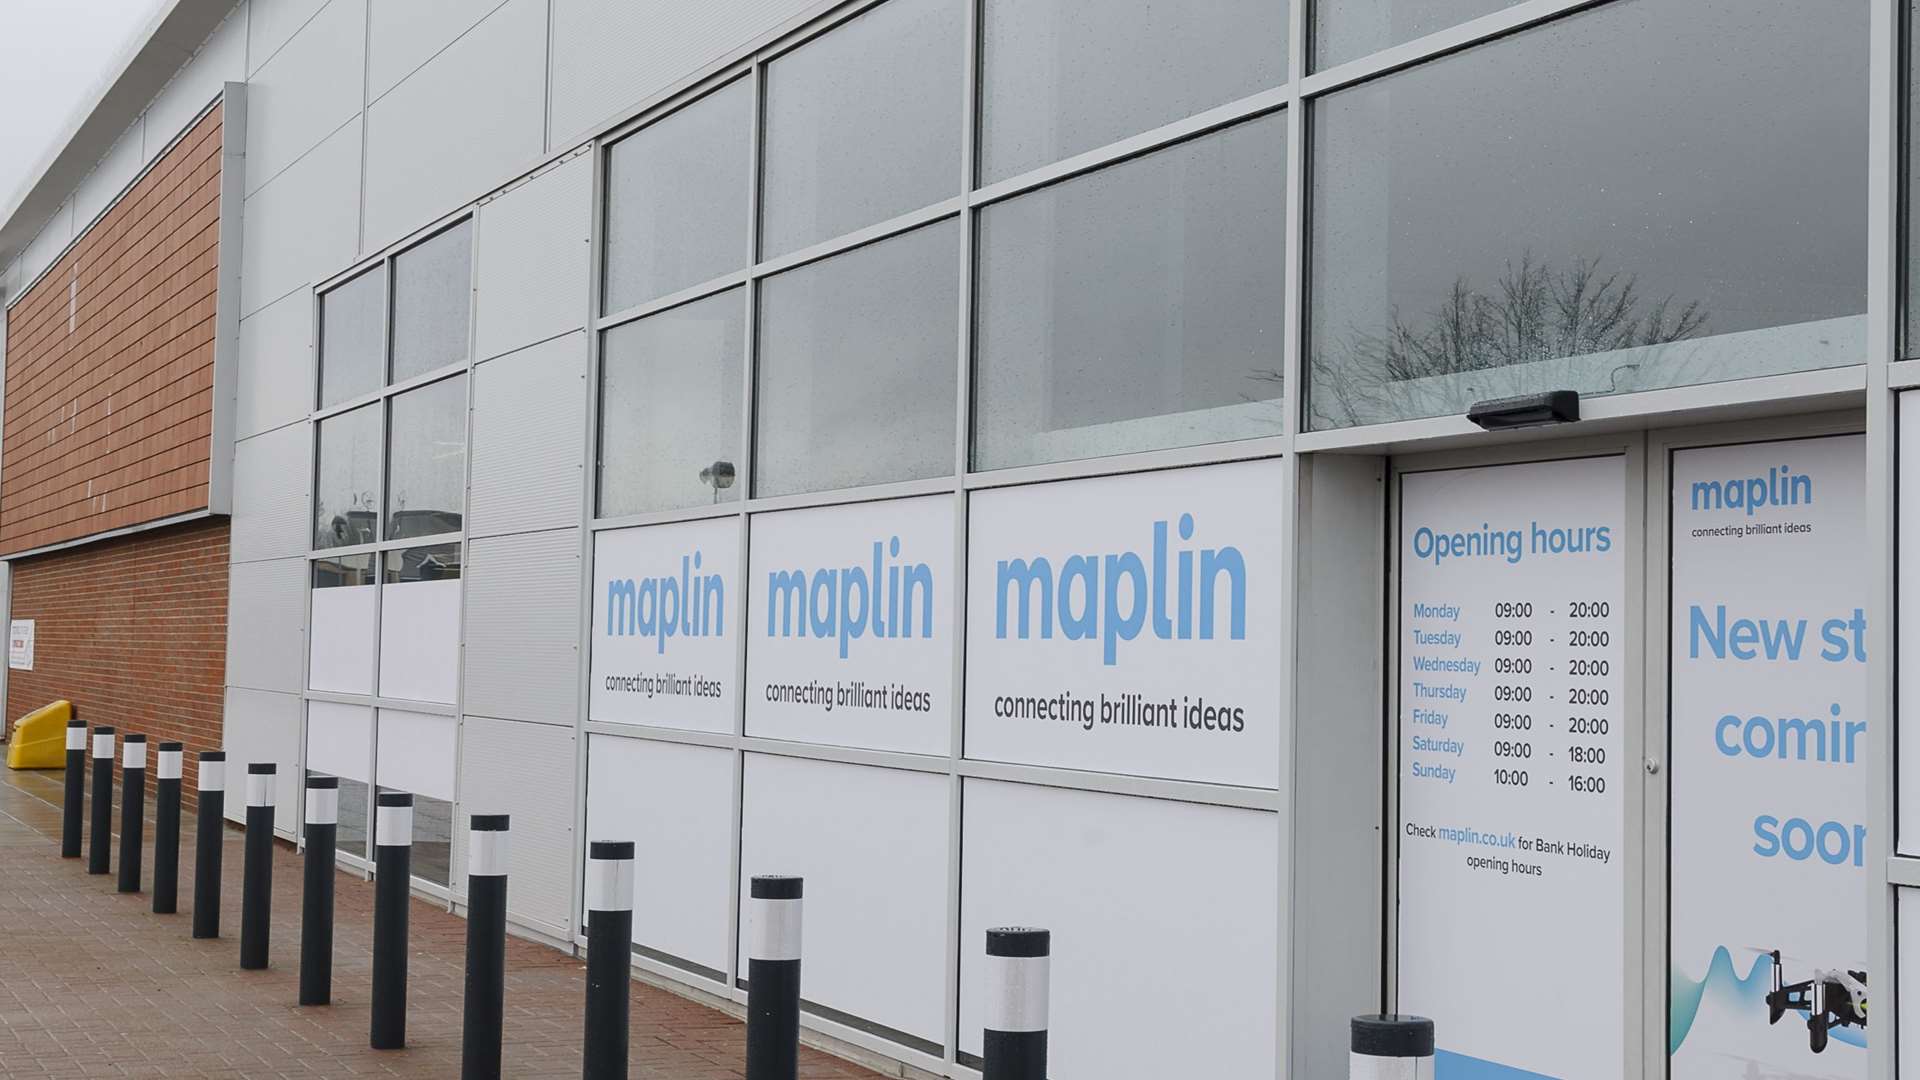 The Maplin store will be situated next to the M&S Foodhall.